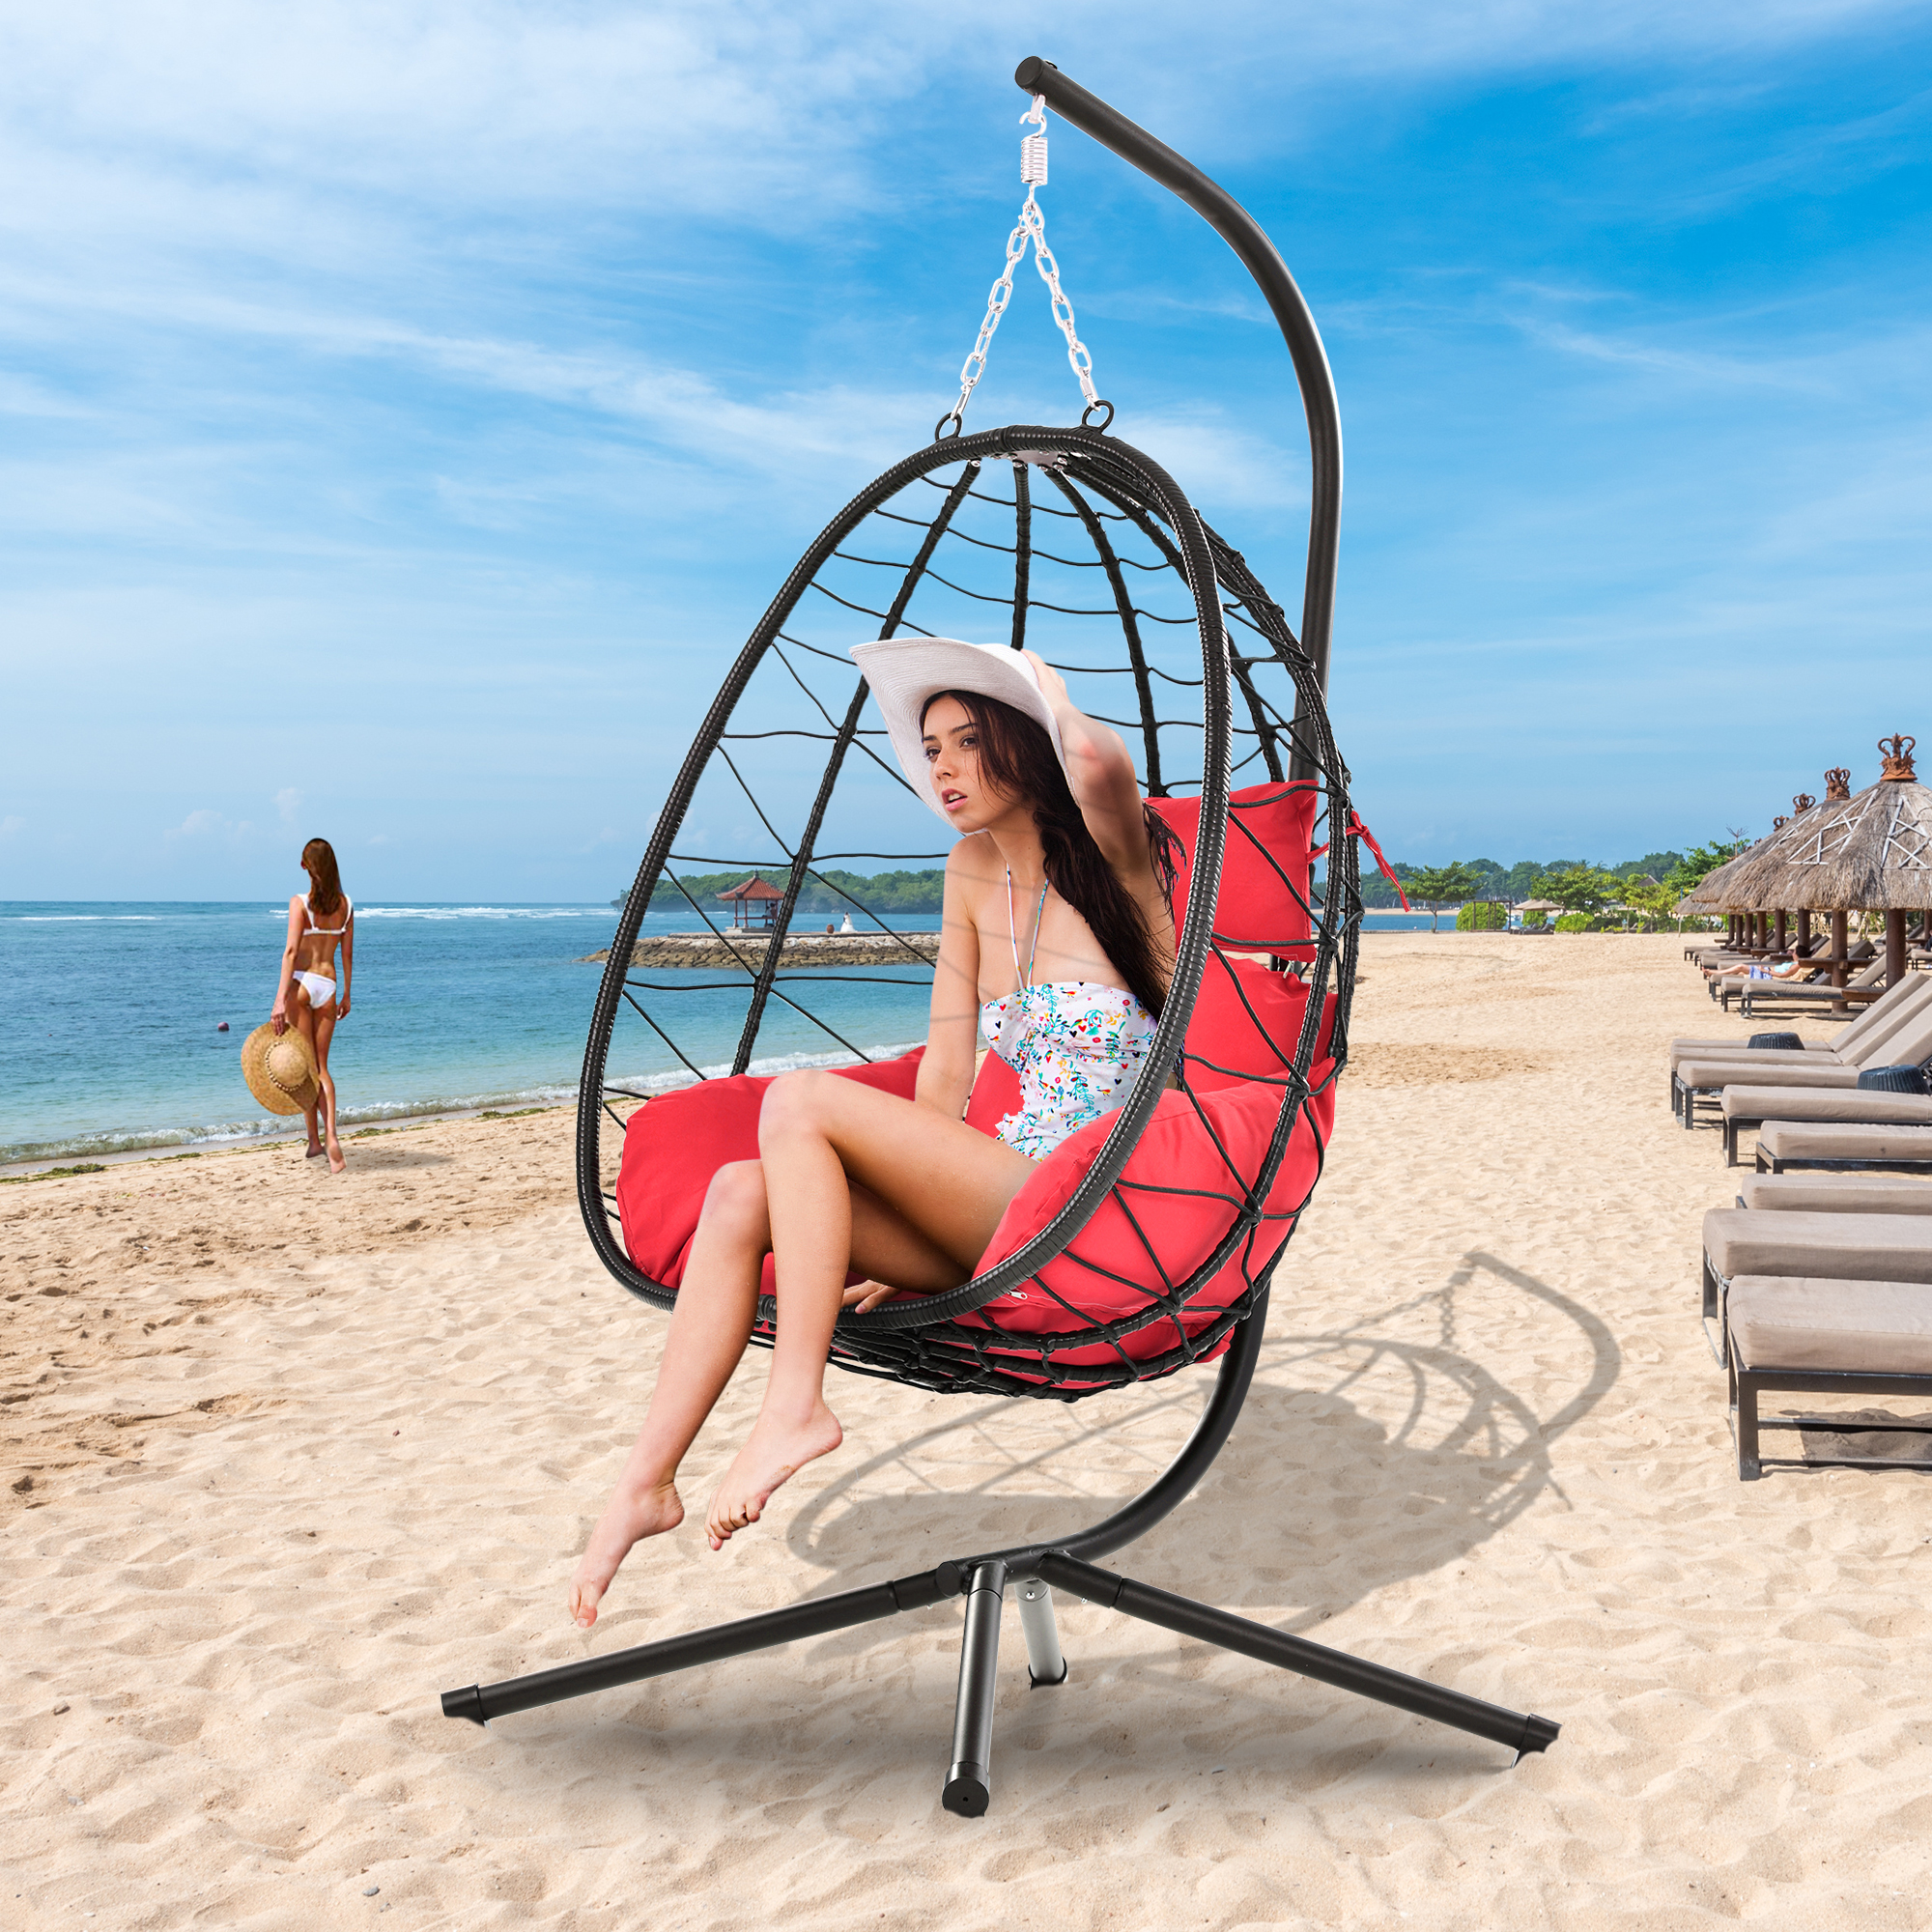 Swing Egg Chair, Outdoor Hanging Egg Chair with Stand, Wicker Swing Chair w/ Seat and Back Cushion, All-Weather UV Rattan Lounge Chair for Livingroom, Patio, Deck, Yard, Garden, 350lbs, Red, SS1954 - image 3 of 9